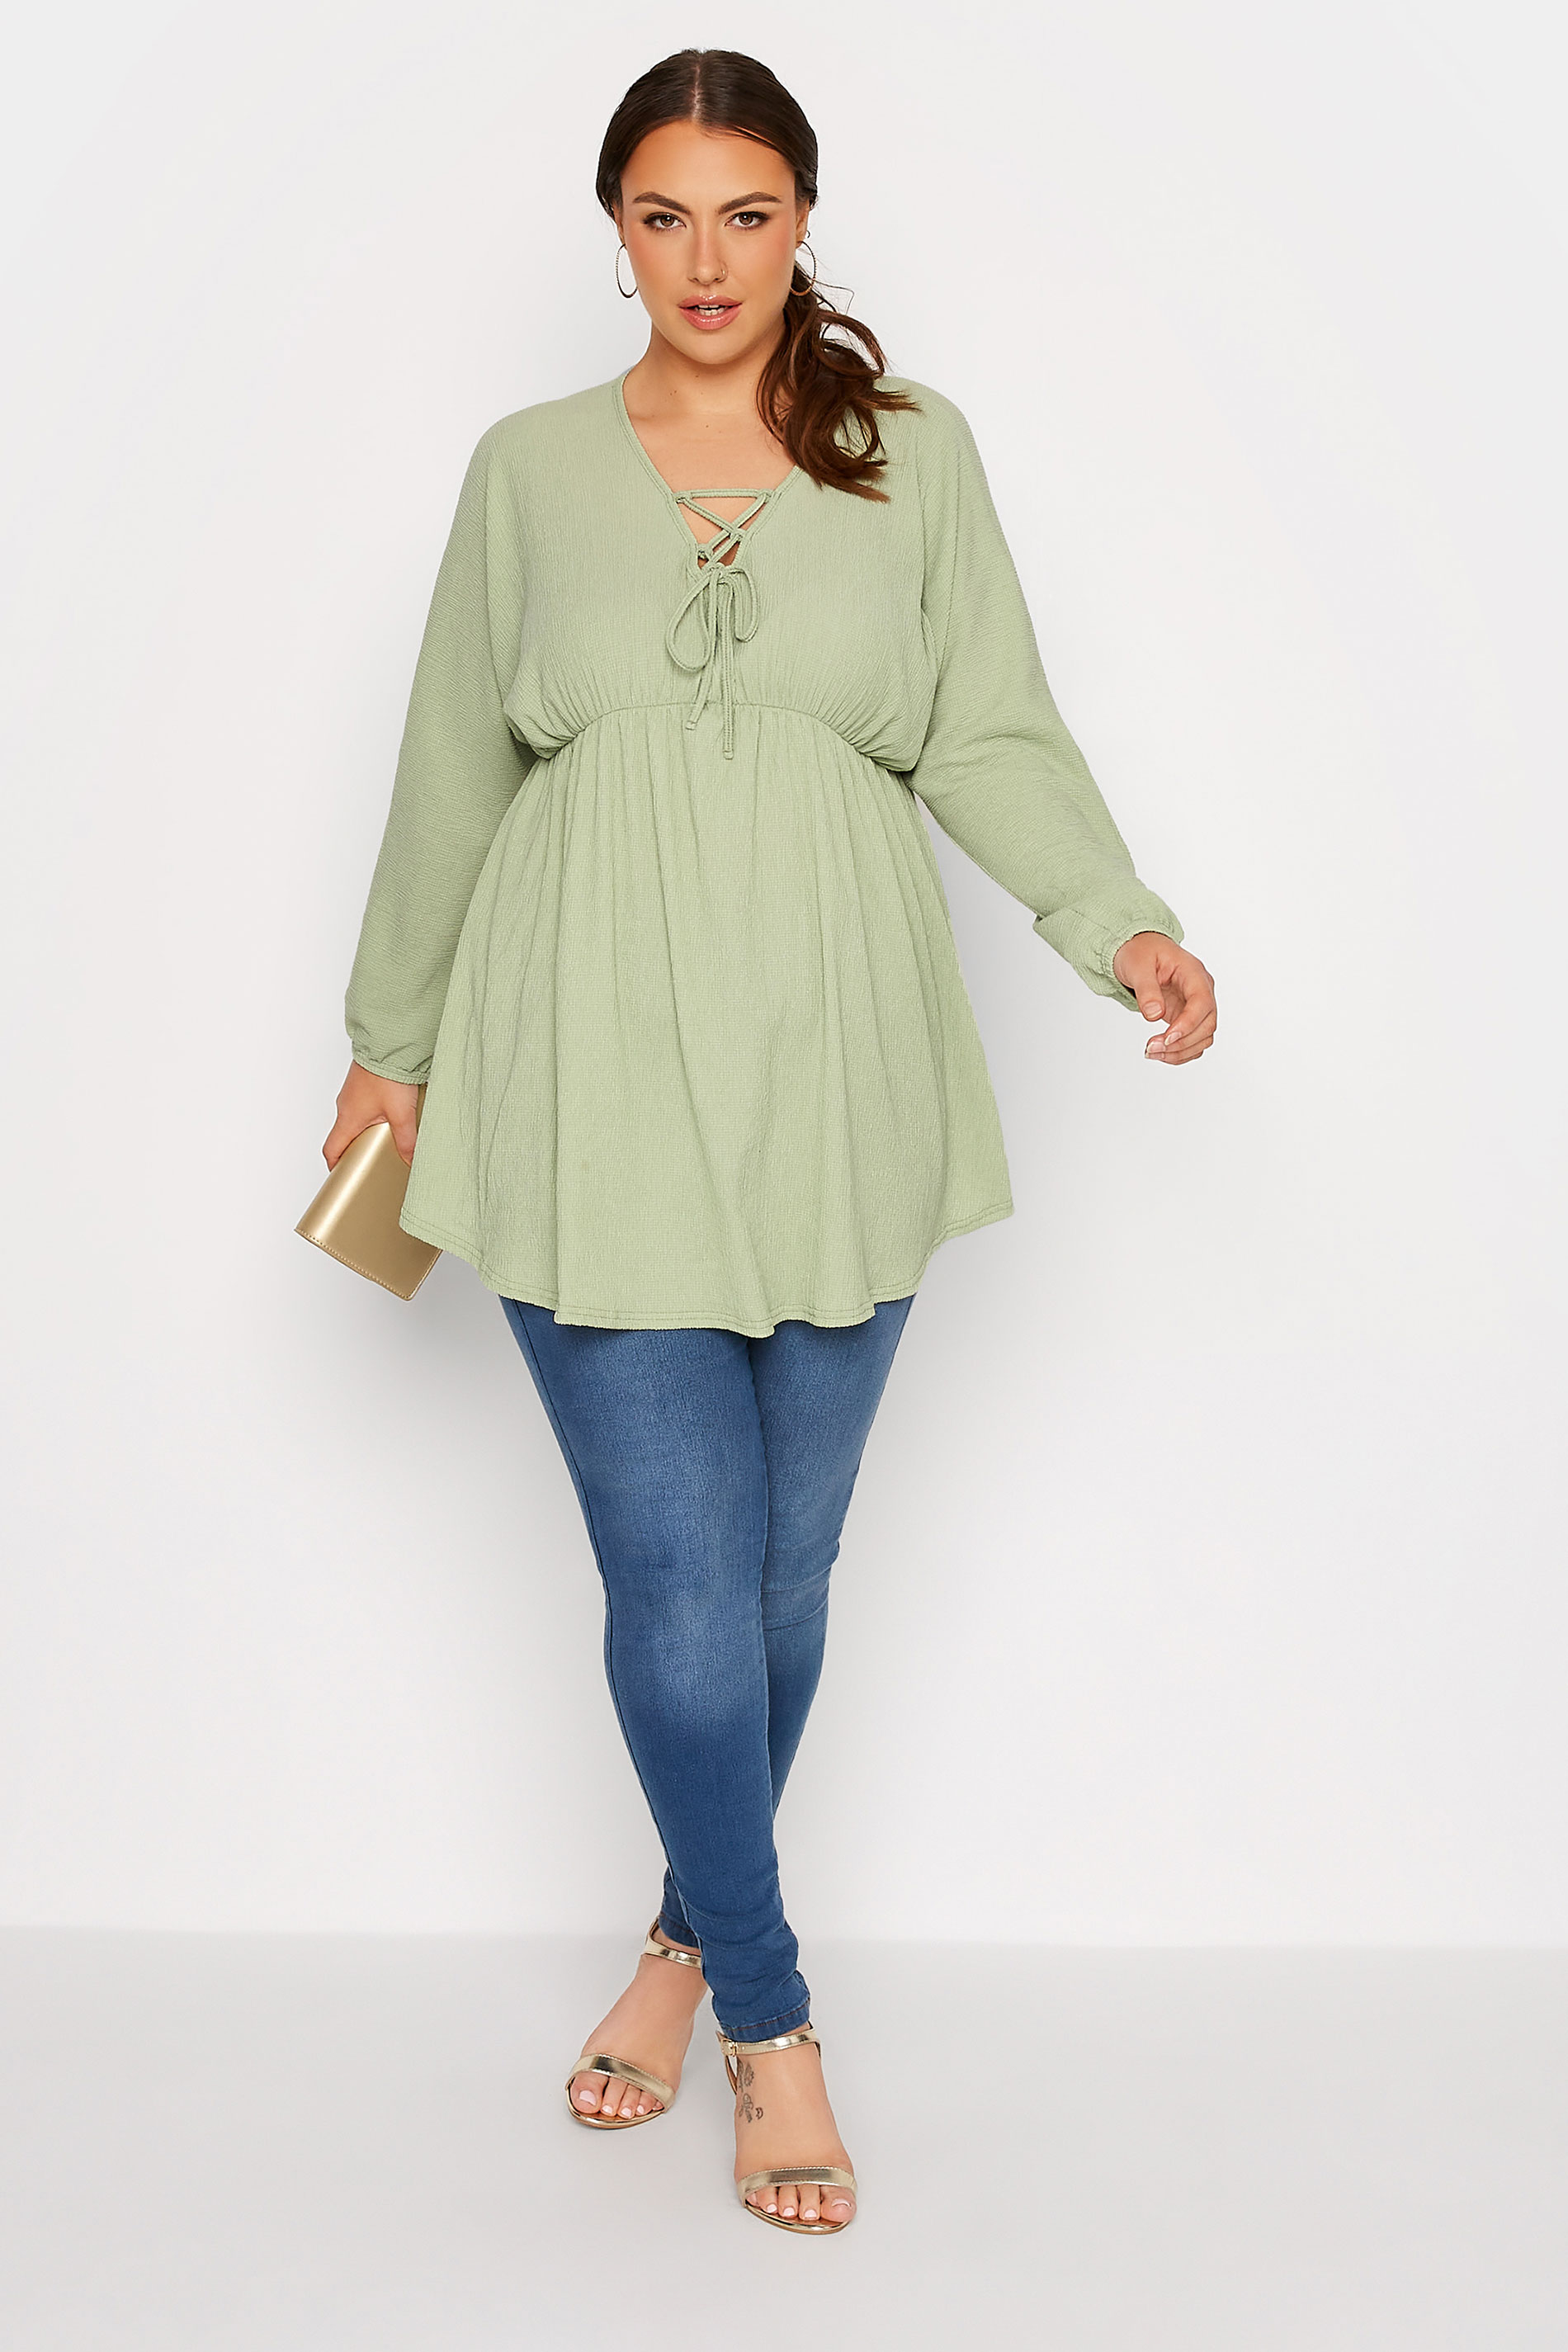 LIMITED COLLECTION Plus Size Sage Green Crinkle Lace Up Peplum Blouse | Yours Clothing 2